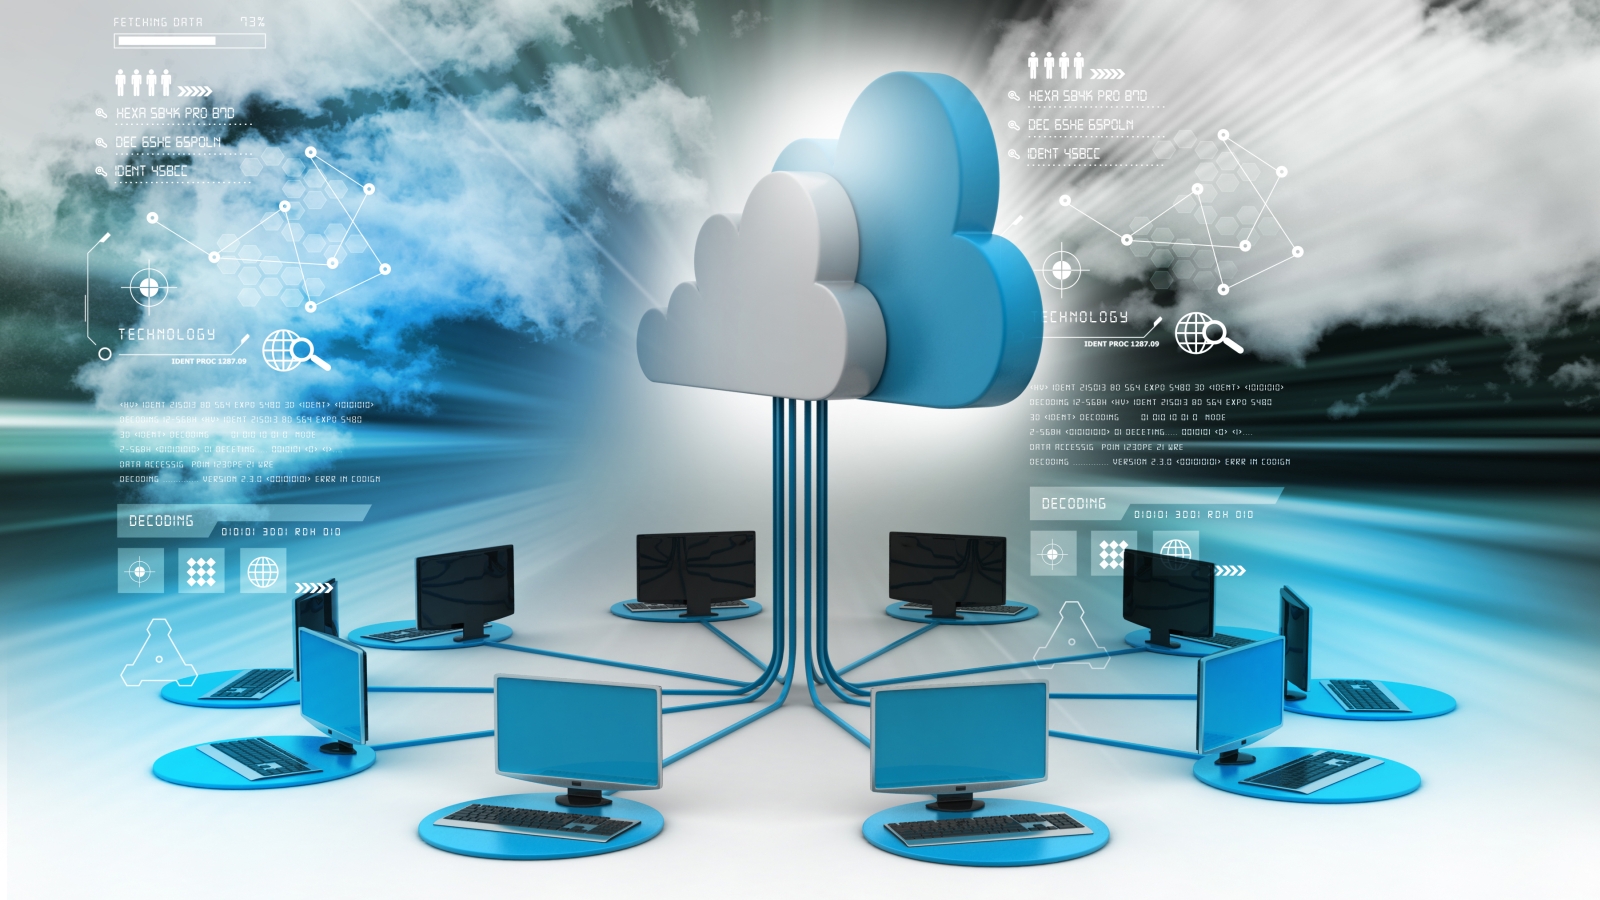 Ask LH: What’s The Best Way To Backup And Share Business Files In The Cloud?